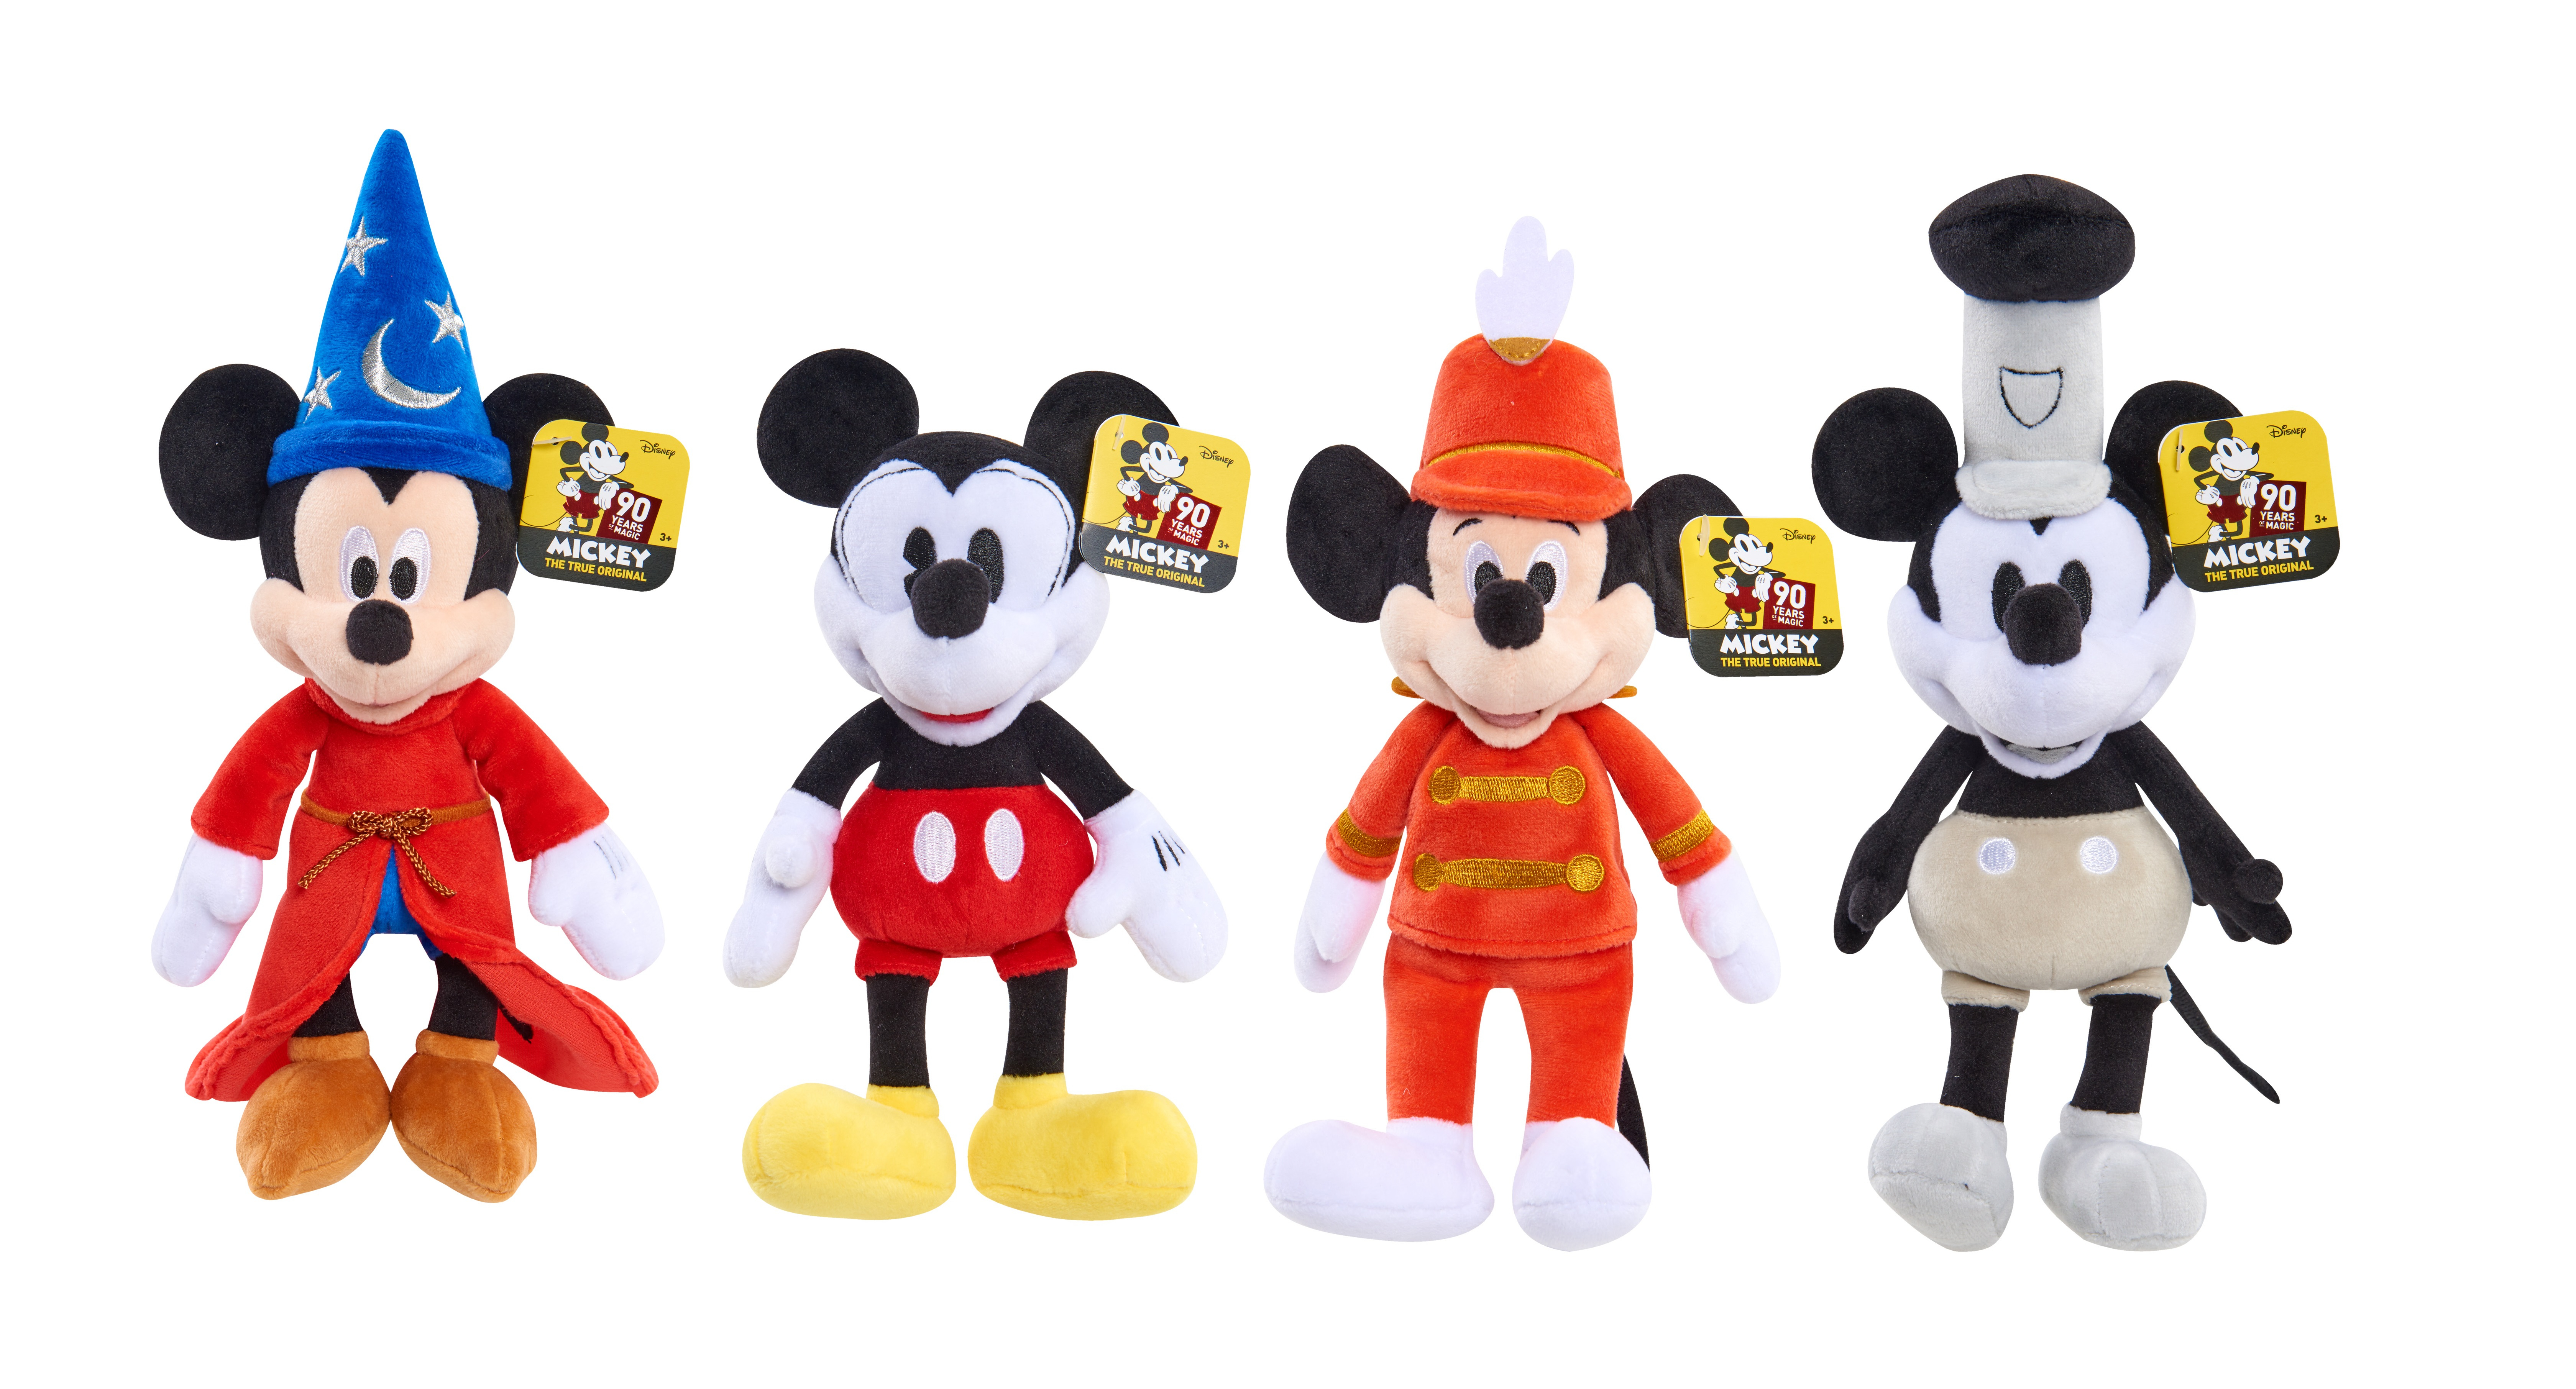 90 years mickey mouse plush